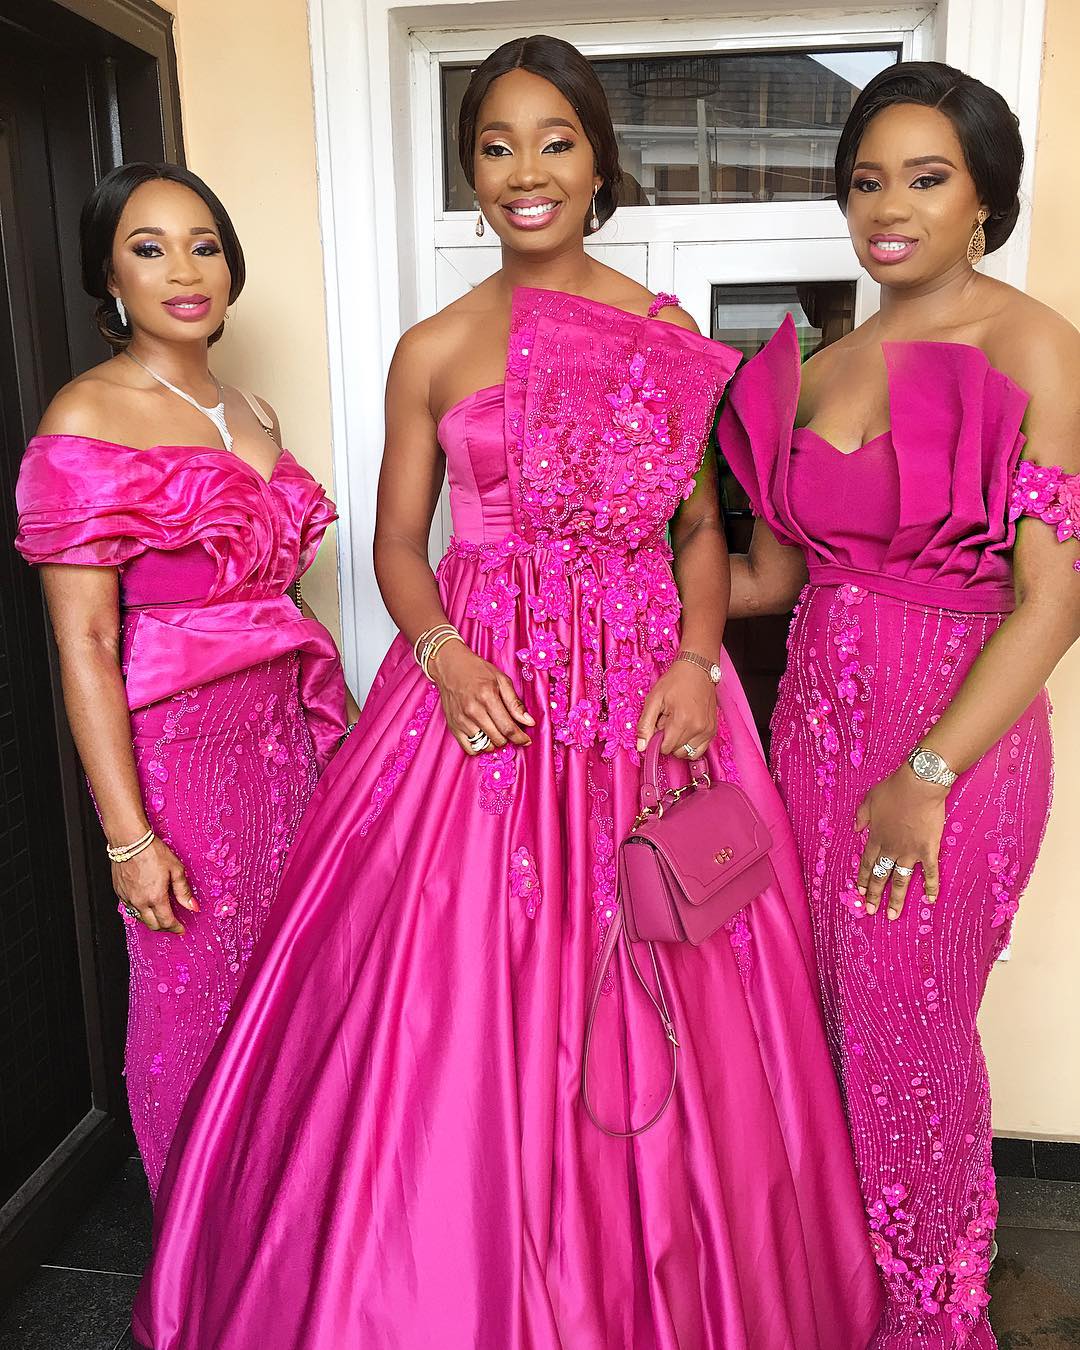 Fashion Meets Art With These Latest Aso Ebi Designs